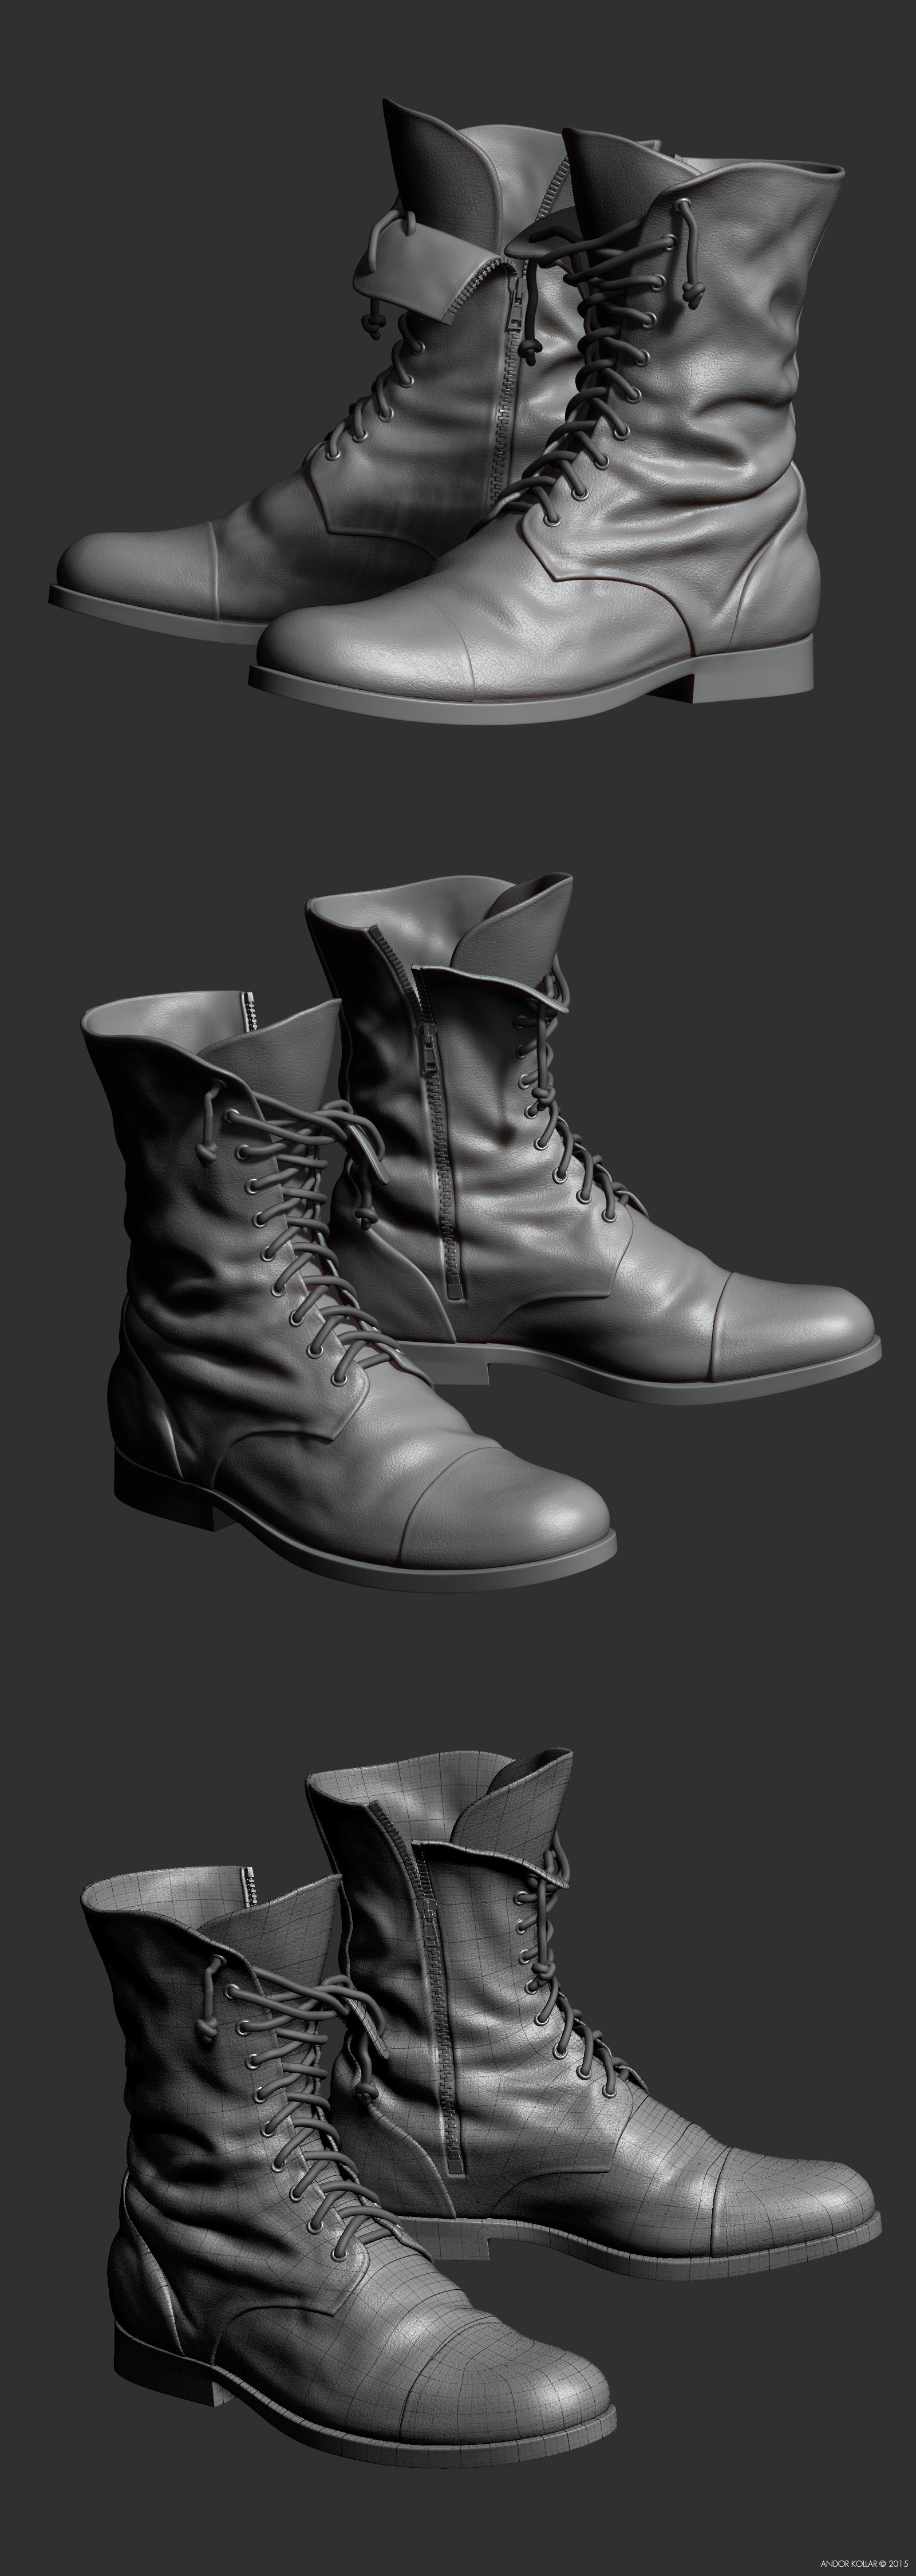 ZBrush military boots